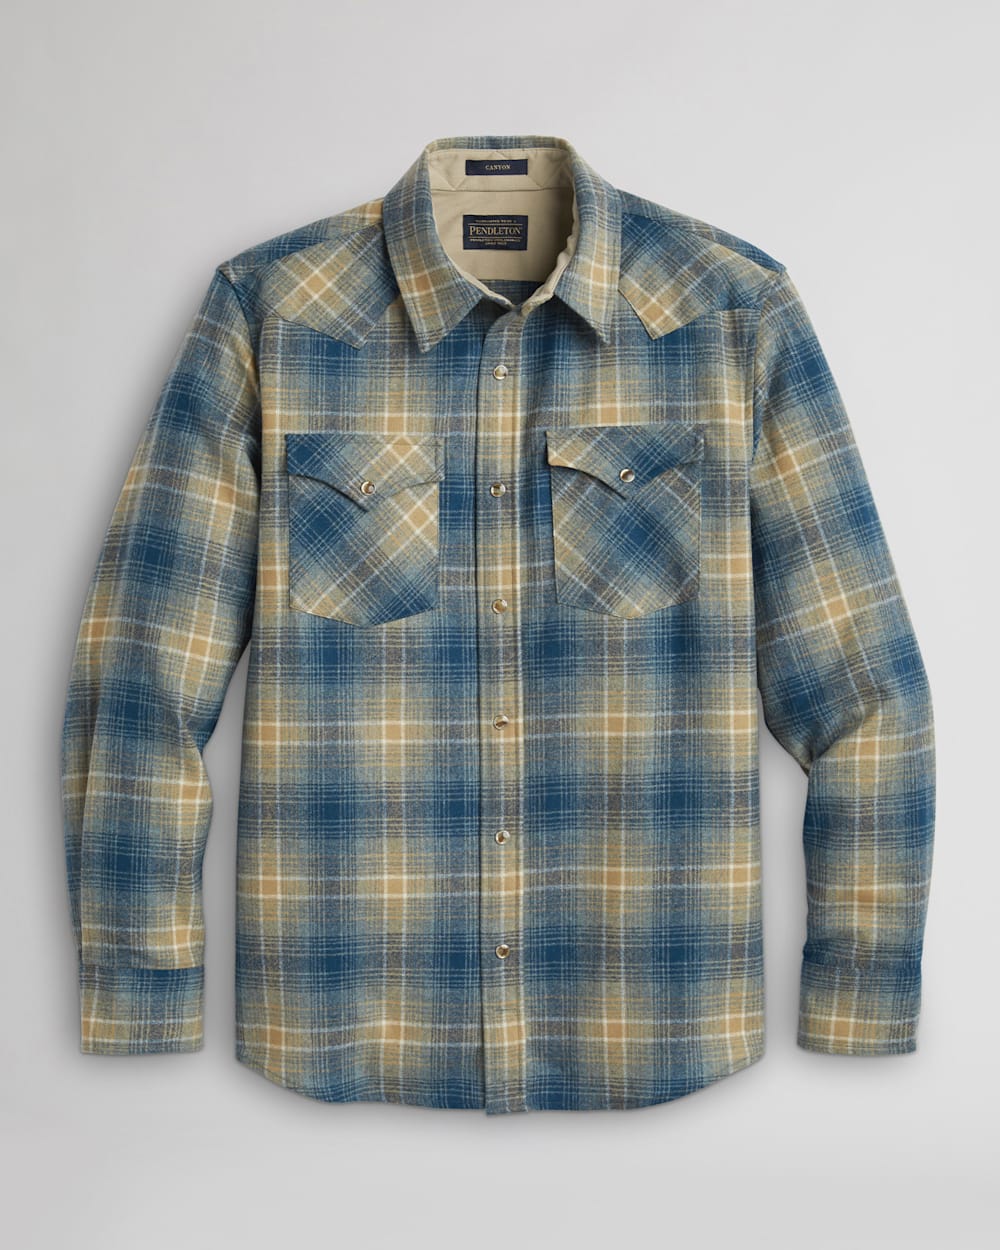 ALTERNATE VIEW OF MEN'S PLAID SNAP-FRONT WESTERN CANYON SHIRT IN TAN/BLUE MIX PLAID image number 6